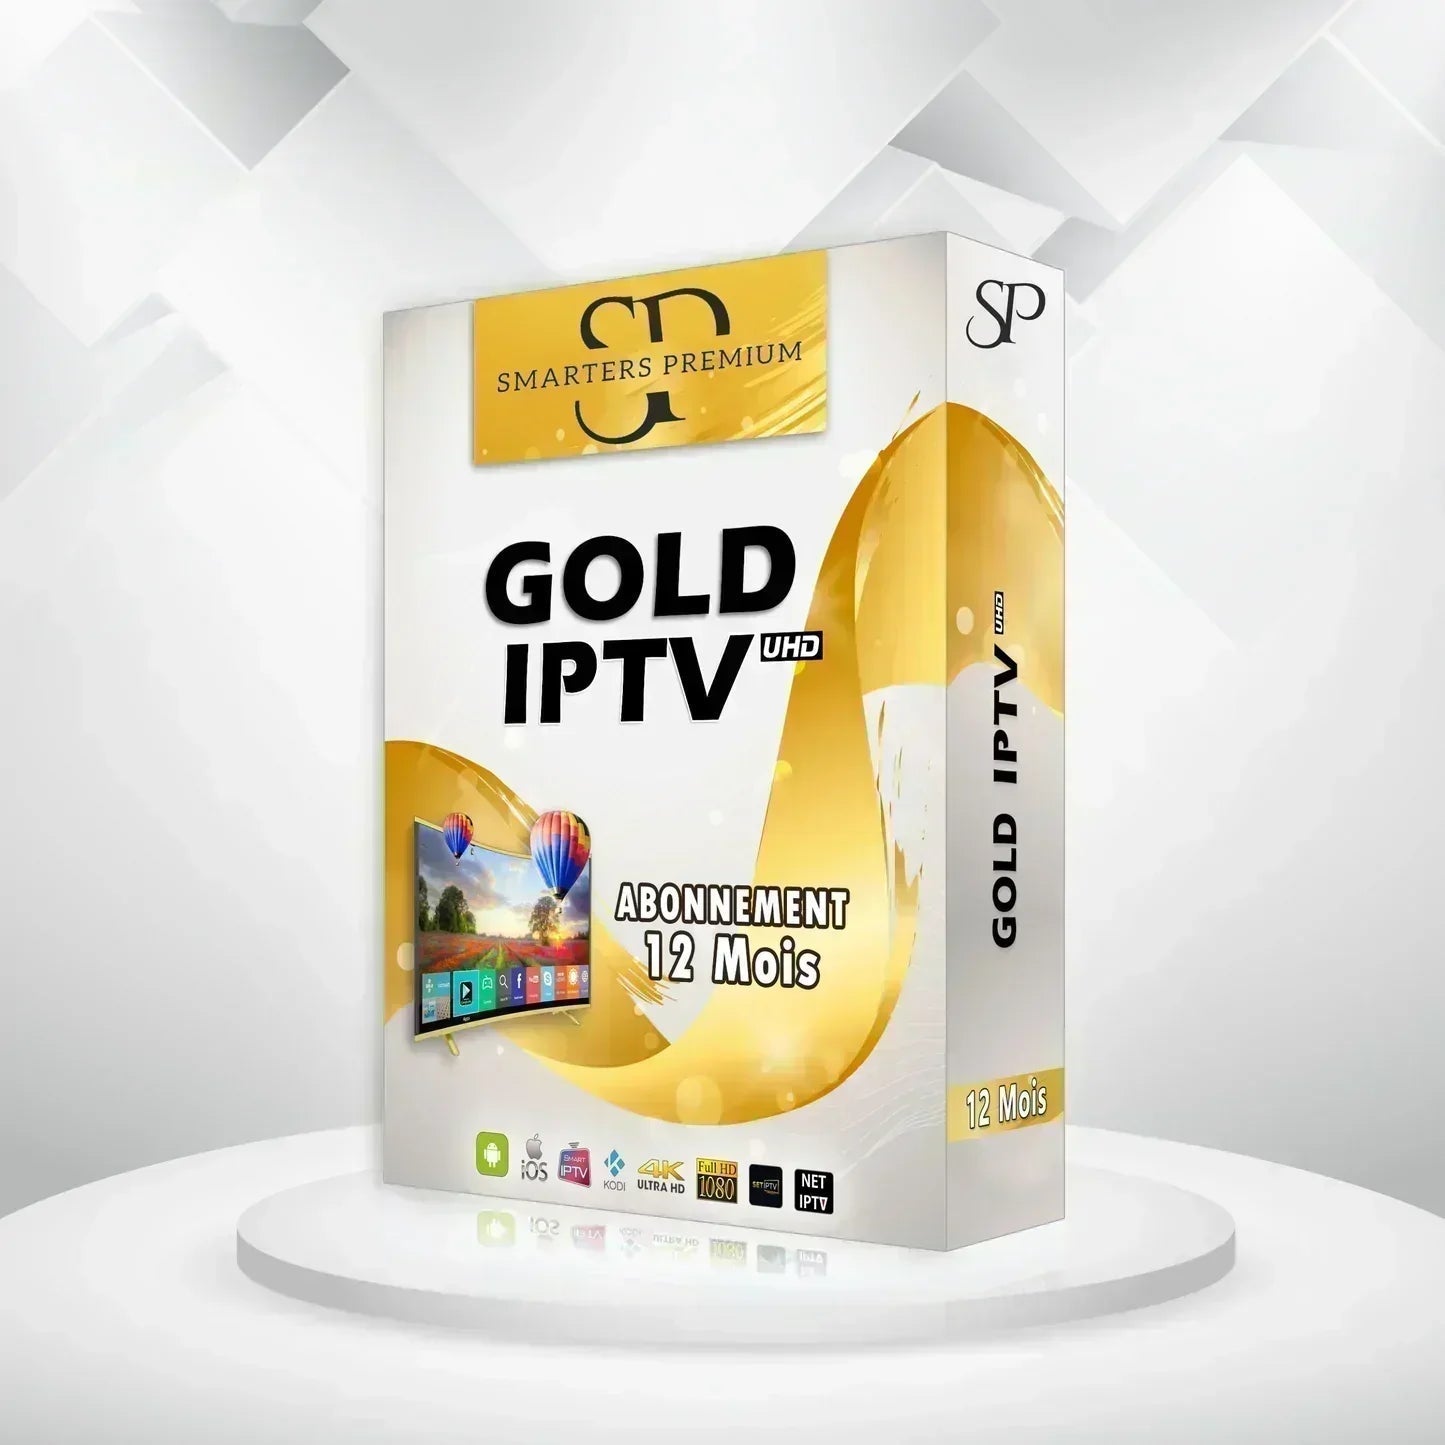 iptv smarters pro has stopped